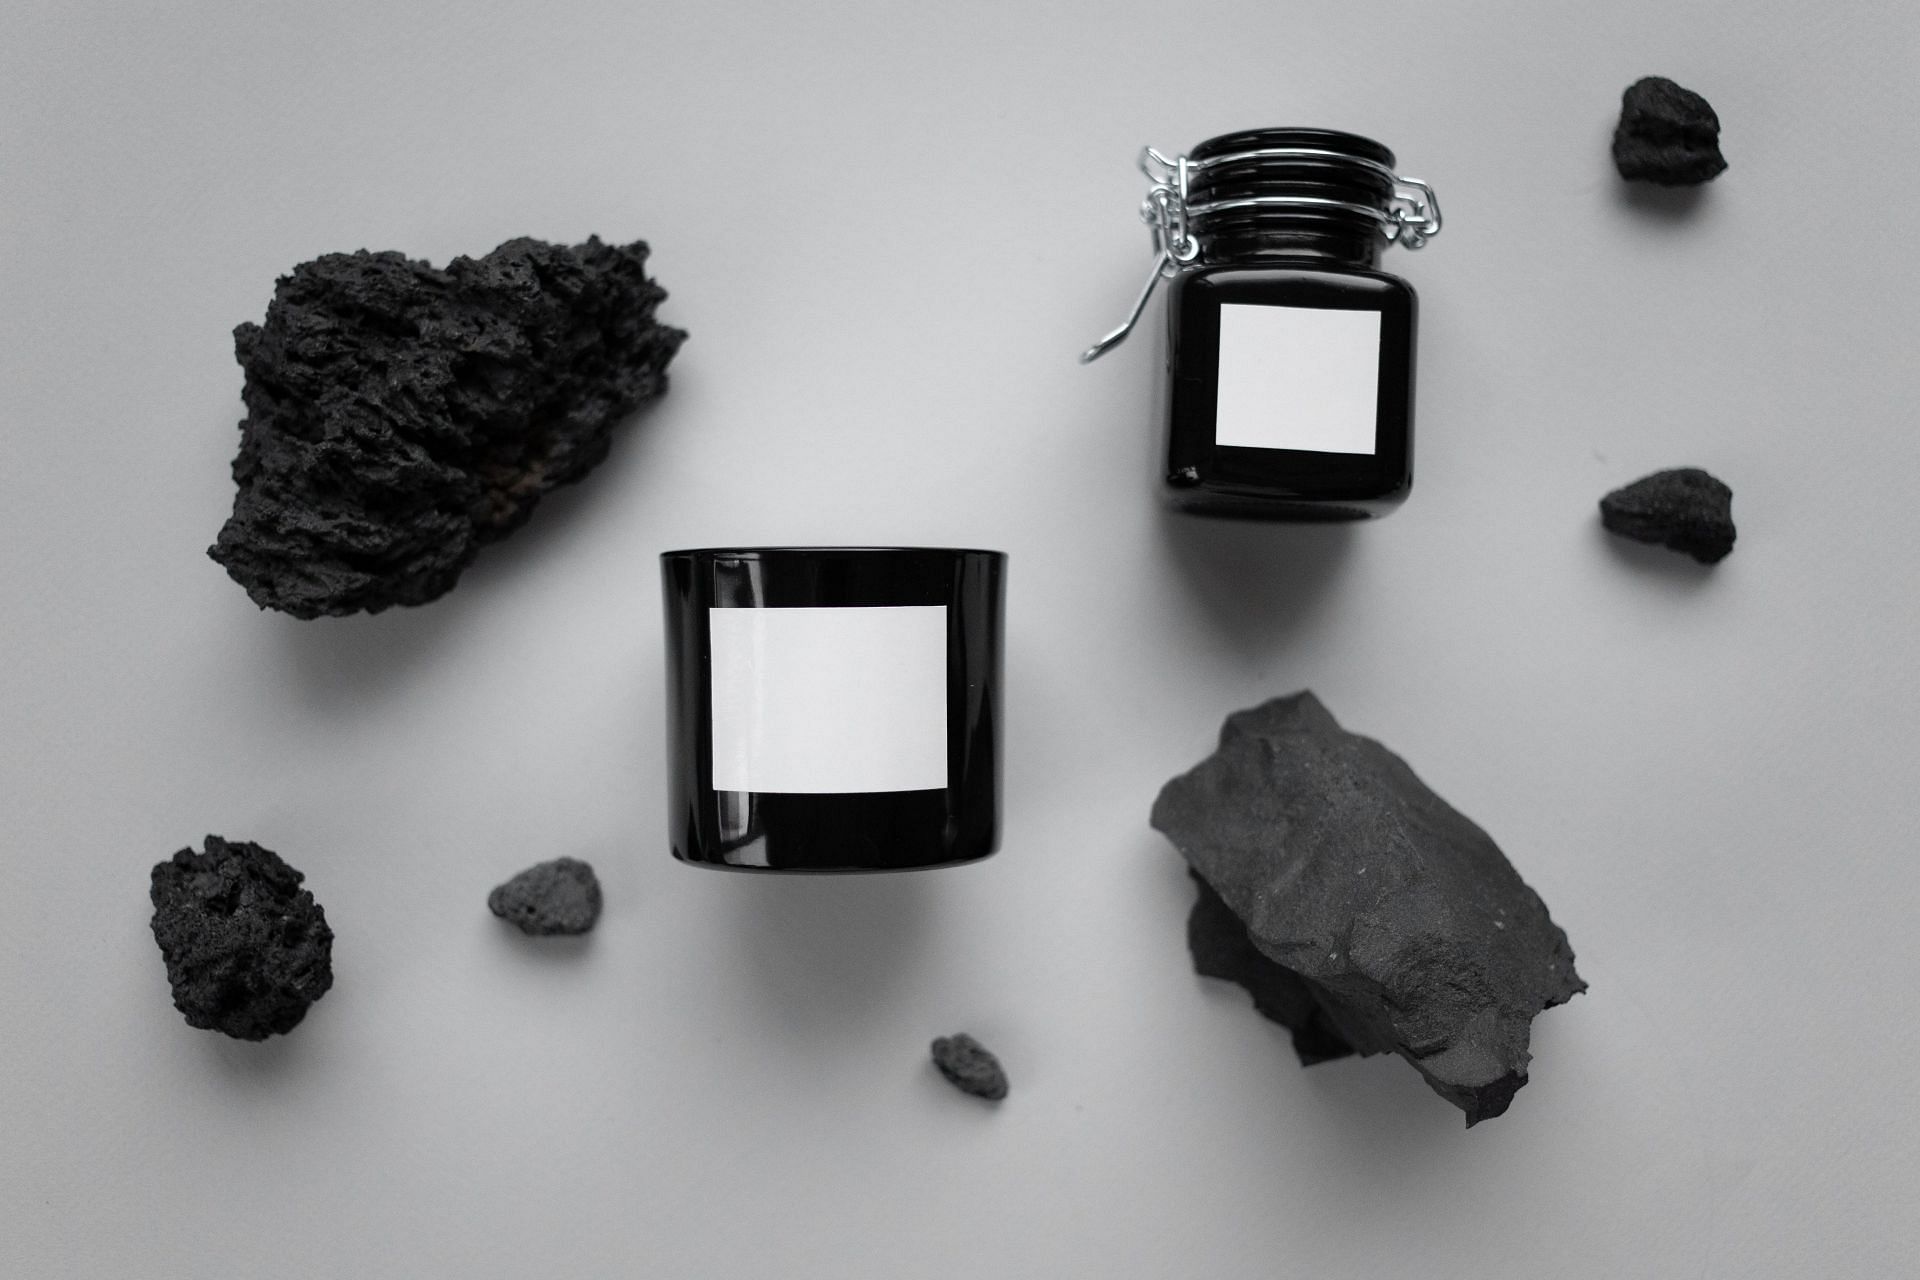 Activated charcoal is used for water purification. (Image via Pexels/Ekaterina Bolovtsoova)